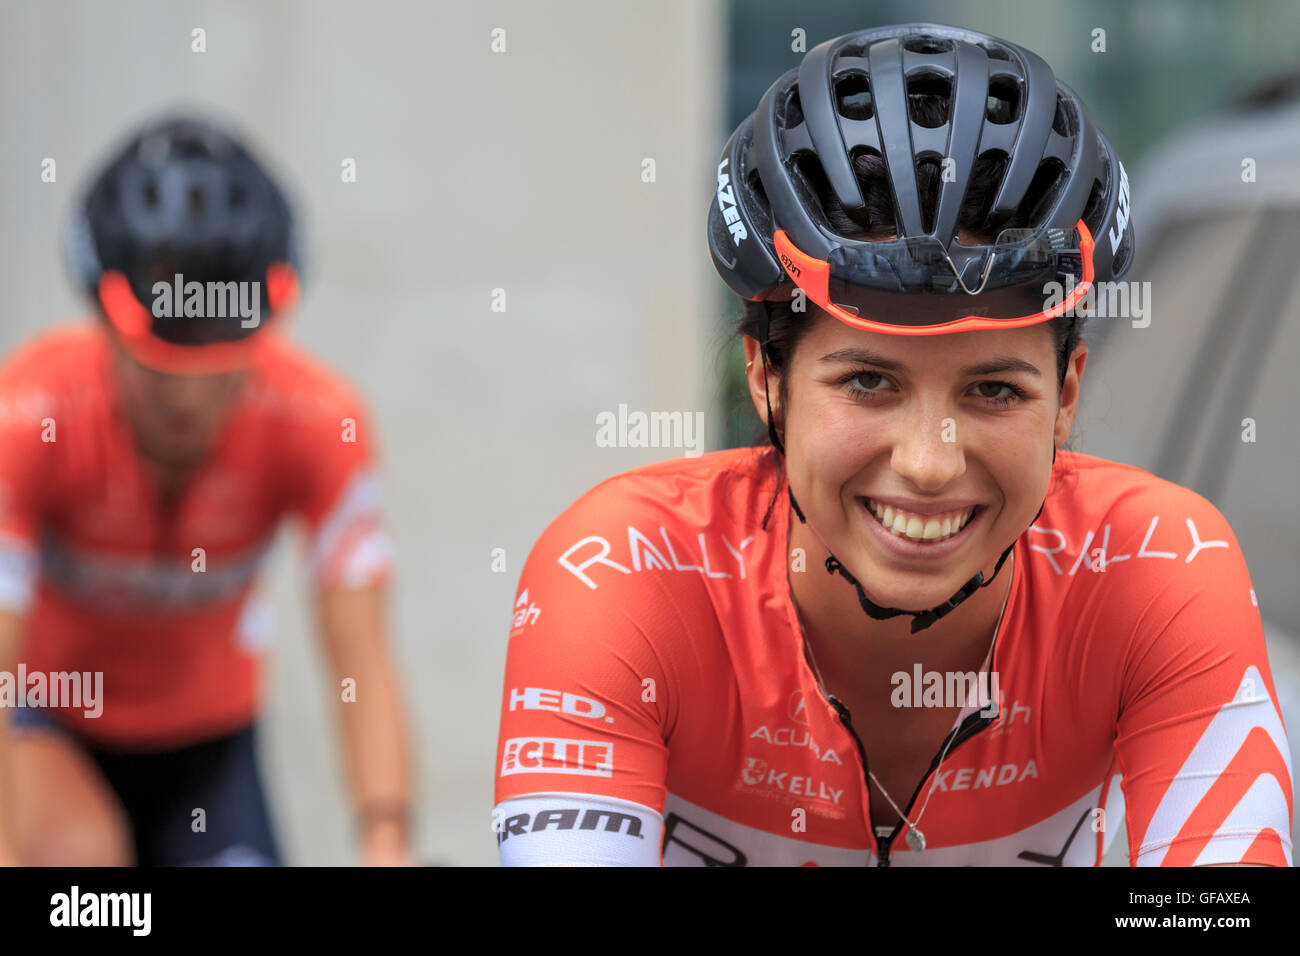 London, UK, 30 July 2016. Prudential RideLondon Classique. Catherine Ouellette (Rally Cycling) smiles ahead of the RideLondon Classique - a 66km race which forms part of the UCI Women's World Tour. Credit:  Clive Jones/Alamy Live News Stock Photo